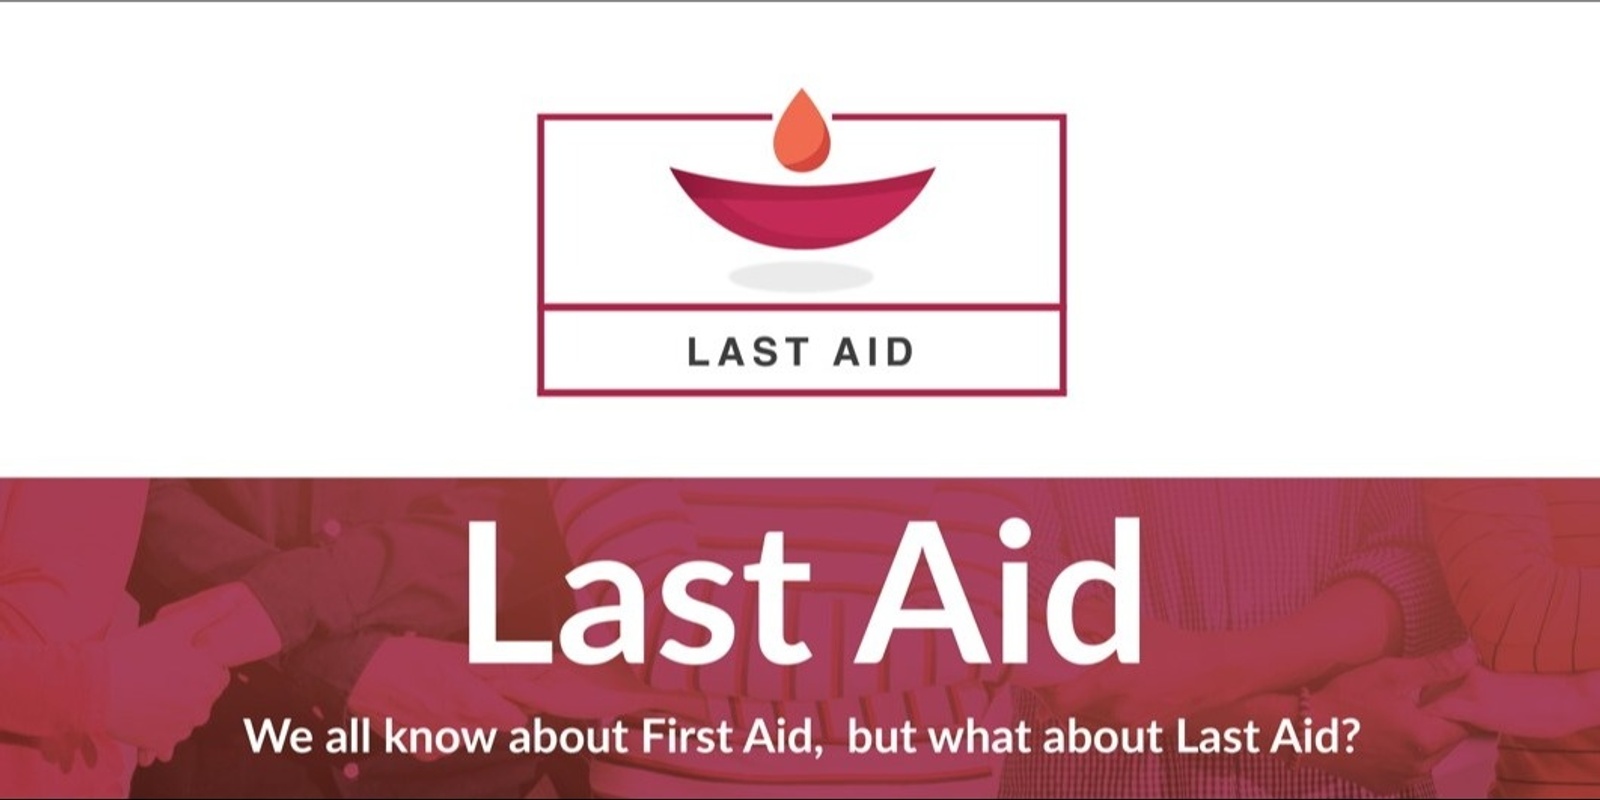 Banner image for Last Aid Victor Harbor